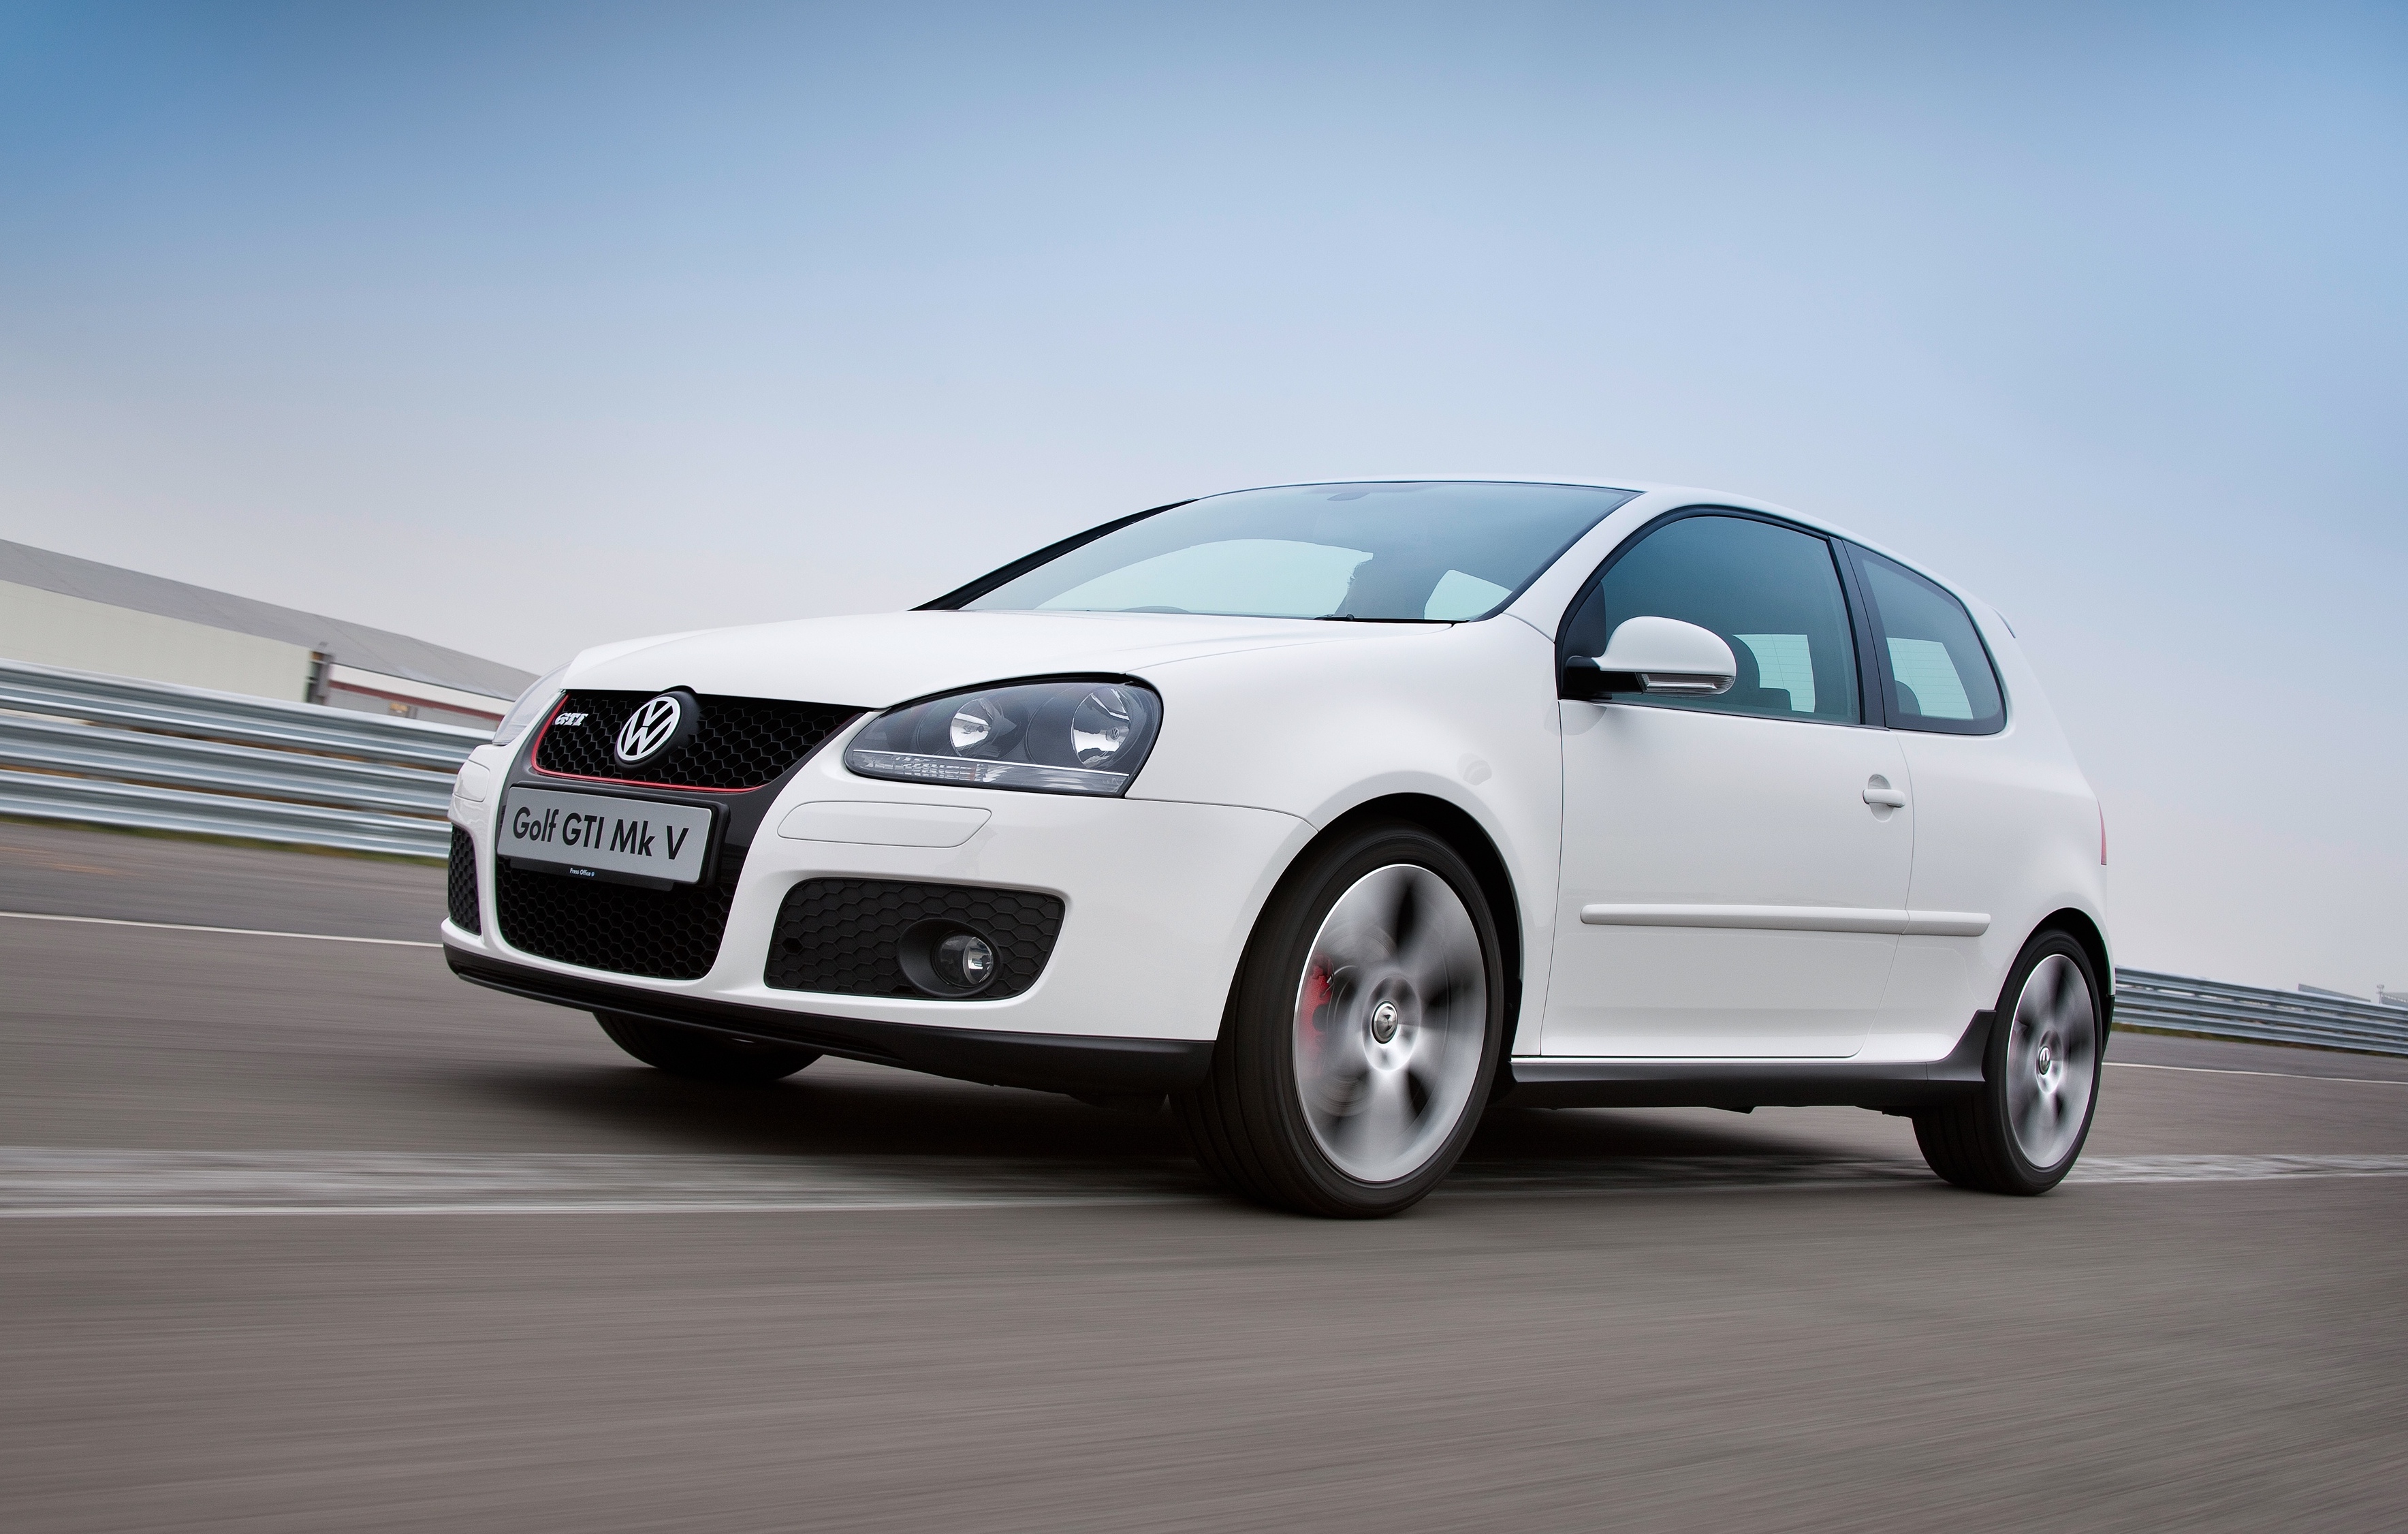 The MK5 GTI was a return to form for VW